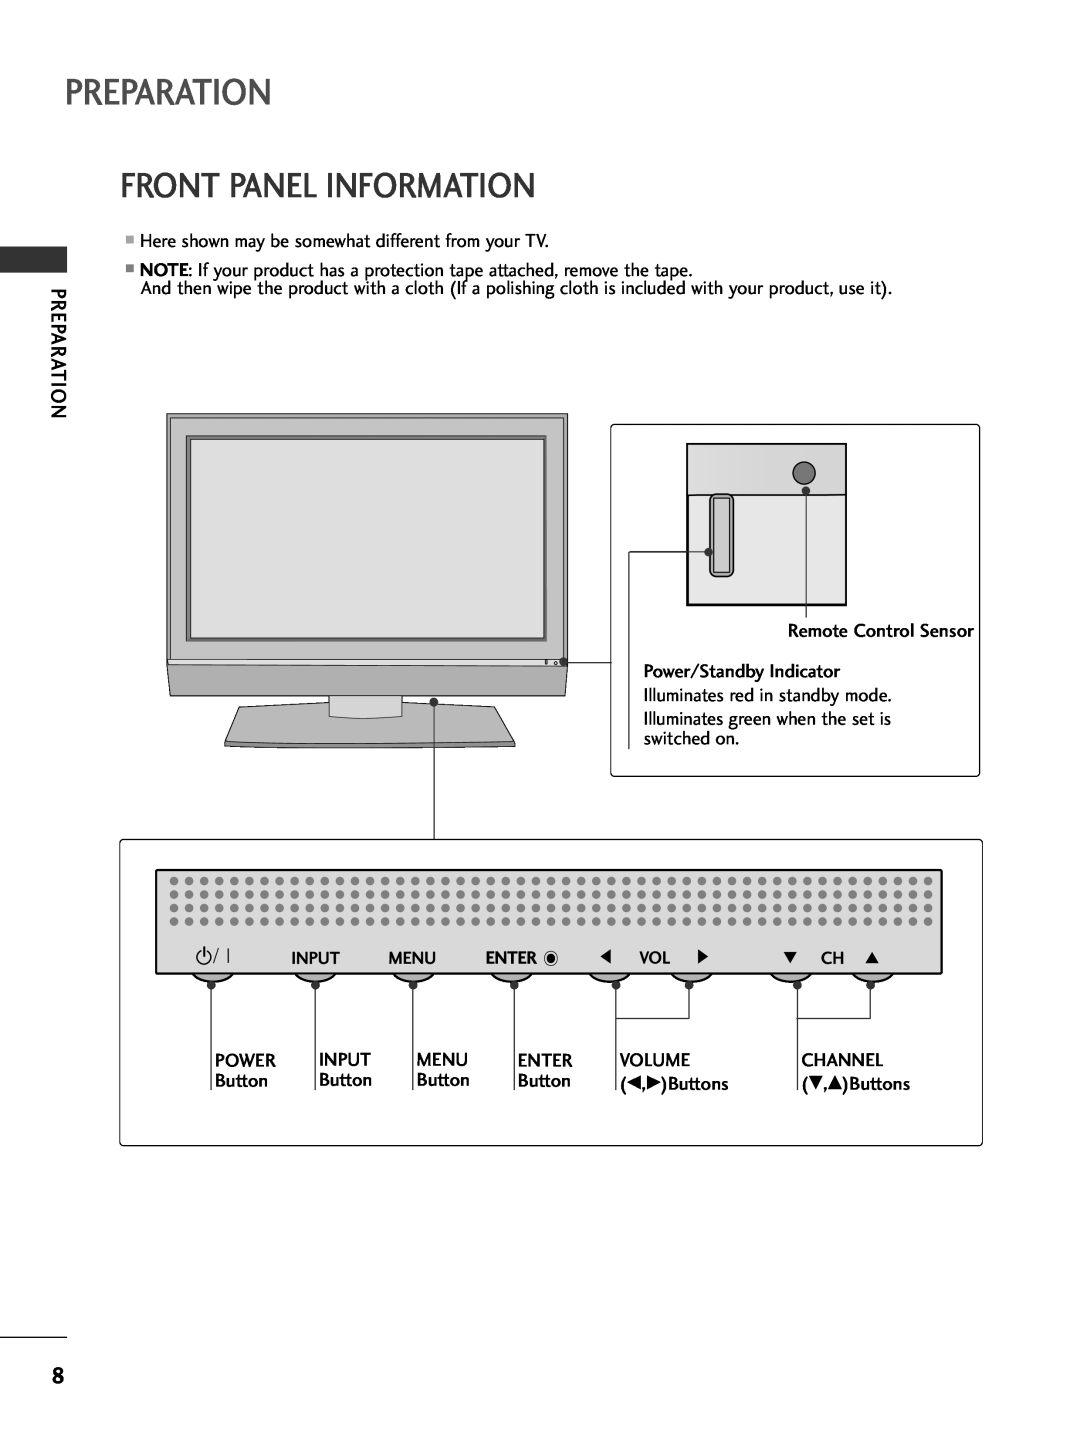 LG Electronics 32PC5DVC owner manual Preparation, Front Panel Information 